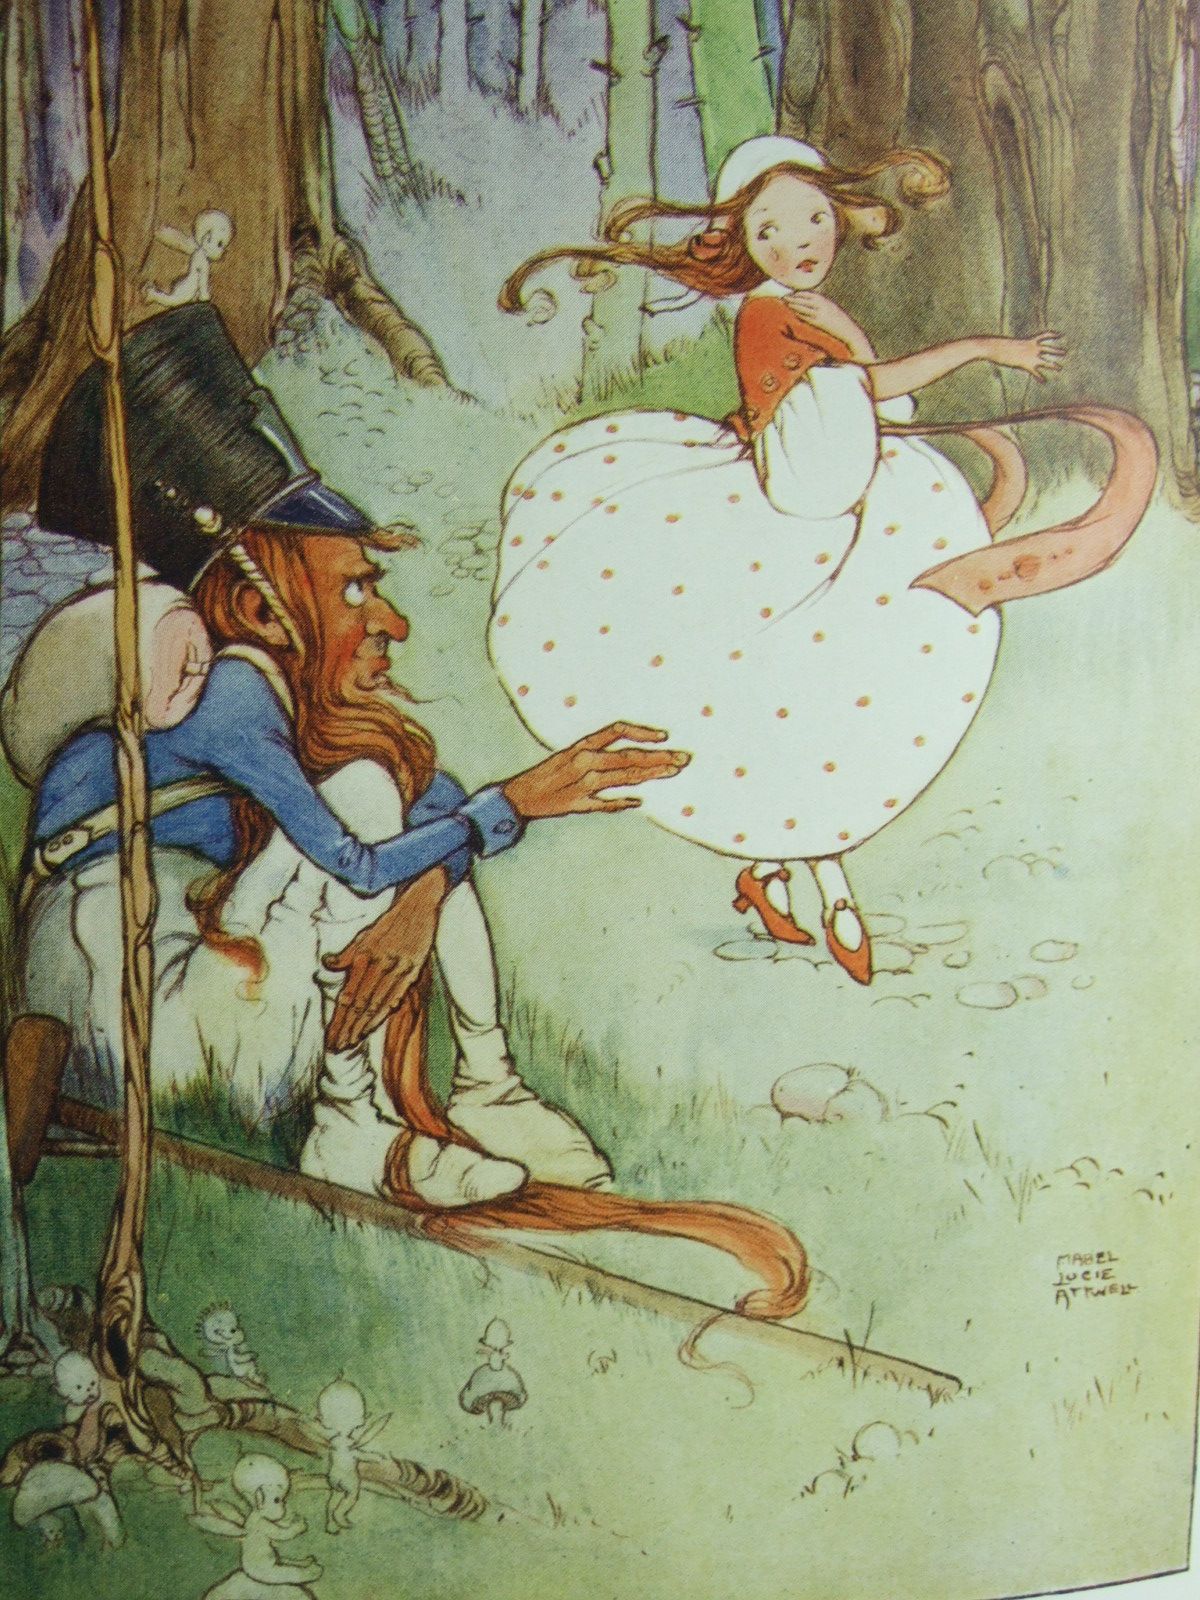 Photo of HANS ANDERSEN'S FAIRY TALES written by Andersen, Hans Christian illustrated by Attwell, Mabel Lucie published by Raphael Tuck & Sons Ltd. (STOCK CODE: 1206923)  for sale by Stella & Rose's Books